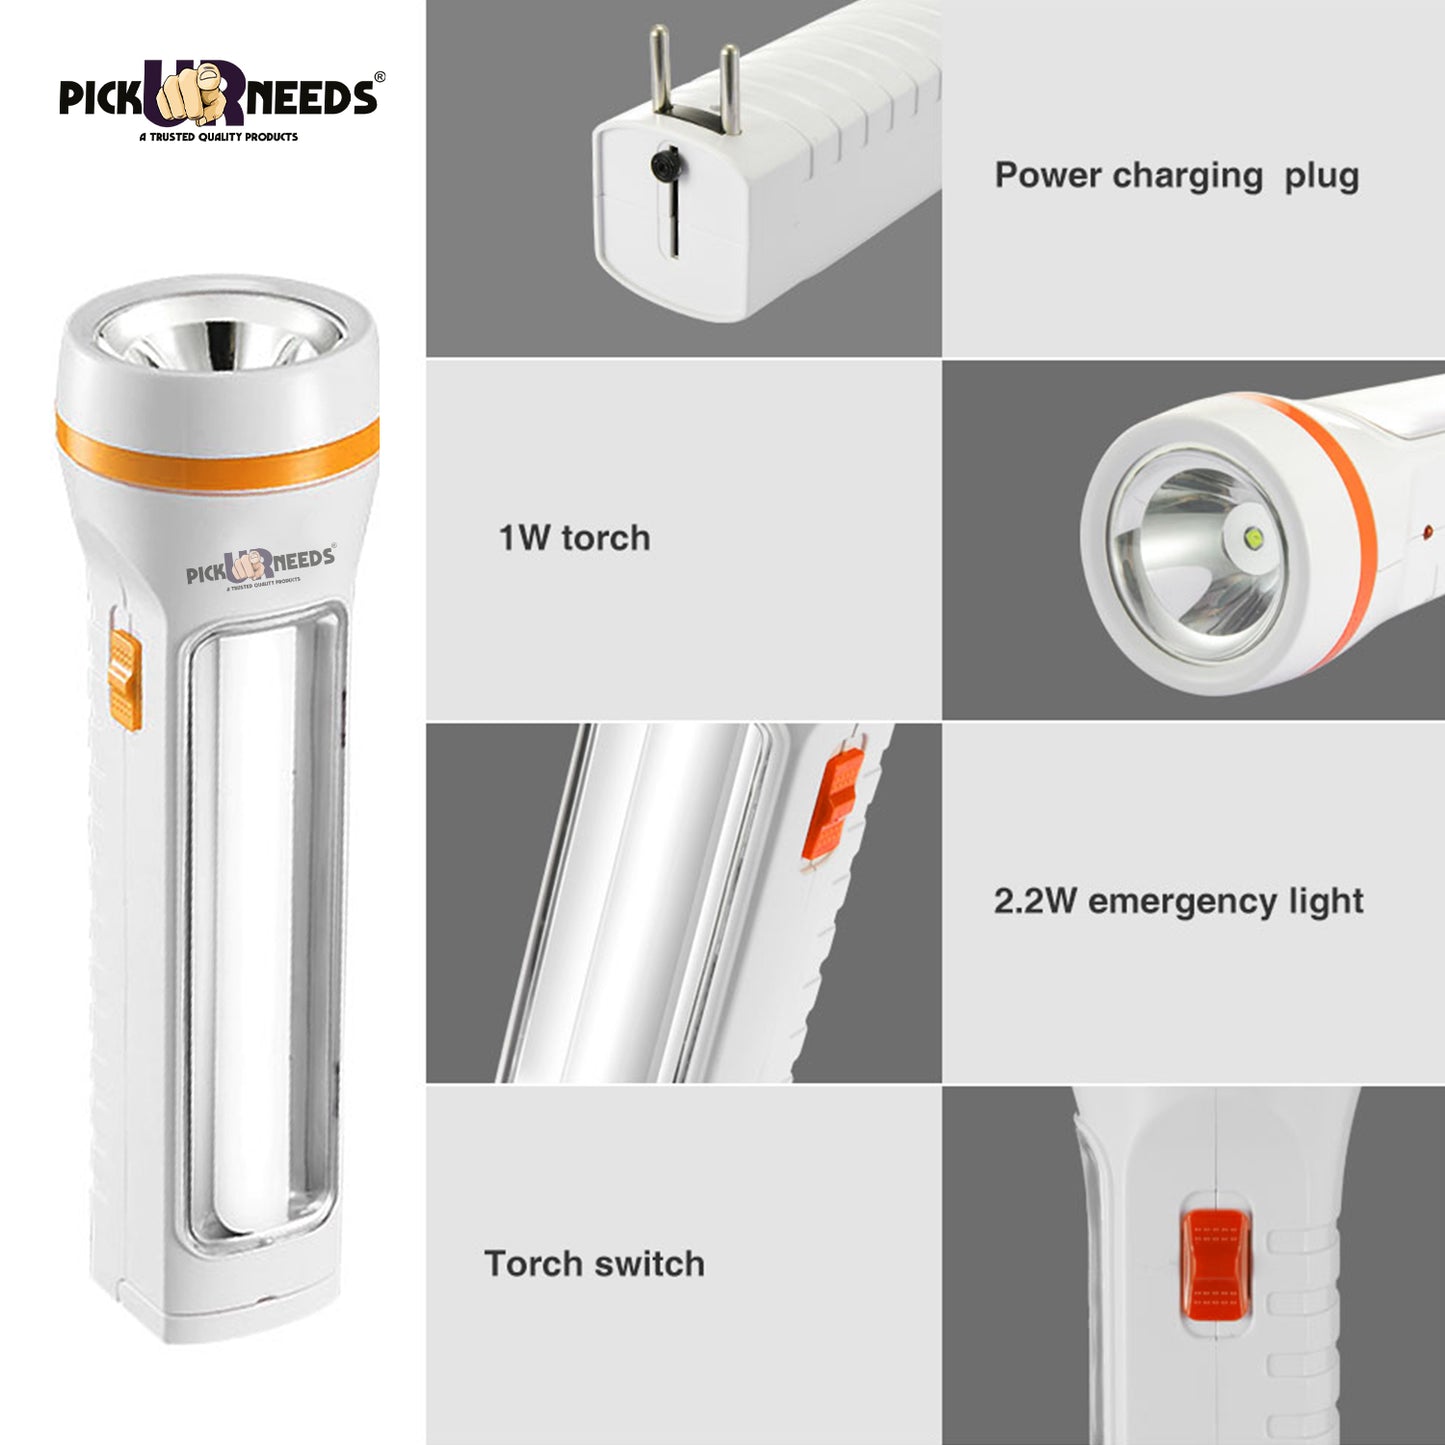 Pick Ur Needs Emergency Rechargeable LED 50W Search Torch Light With Slide Charging Plug (Pack of 2)